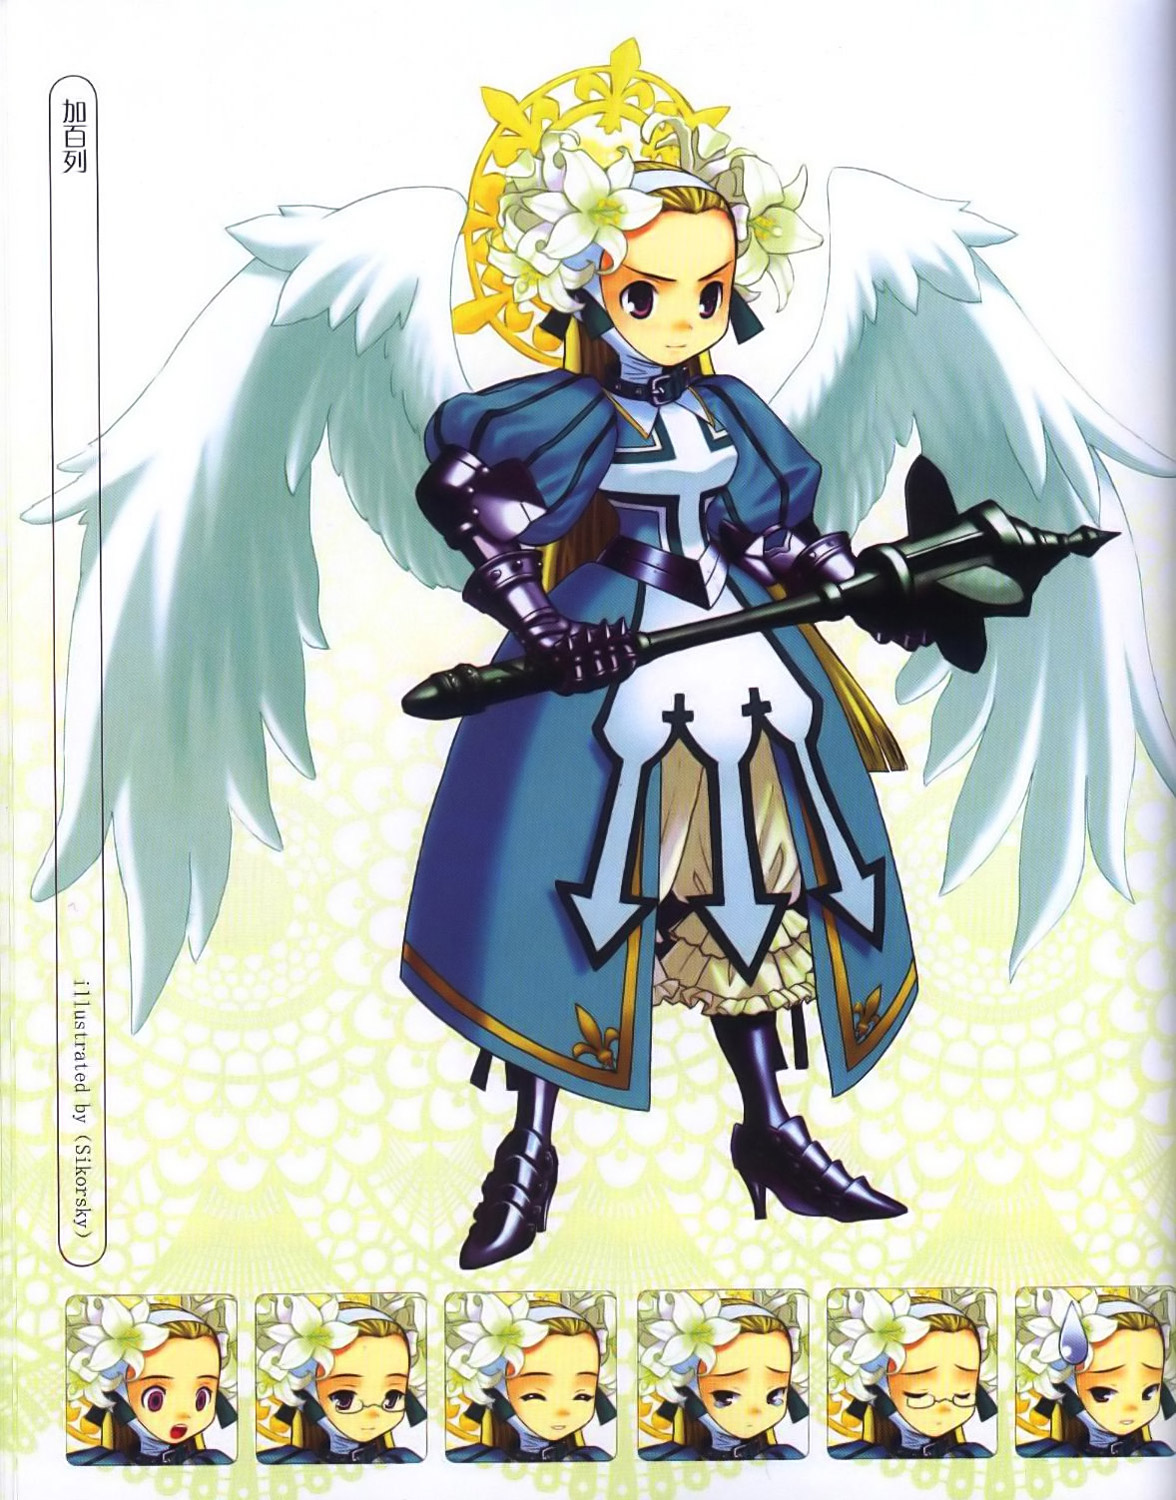 Angel and devil encyclopedia: dark and light side books image by Various Artists